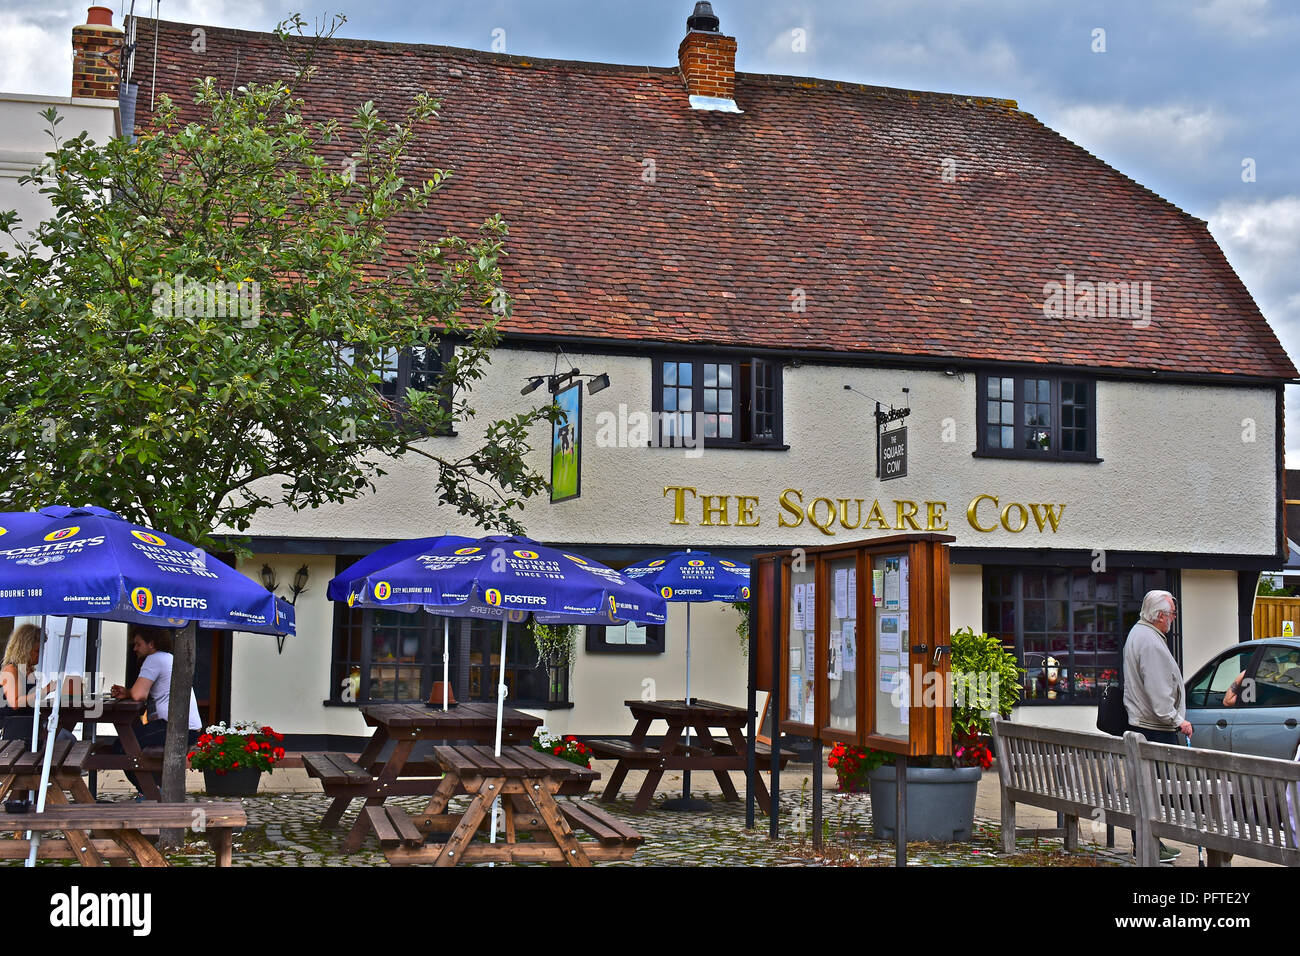 The Square Cow is a traditional English pub situated on the square in Wickham, Hampshire,England Stock Photo